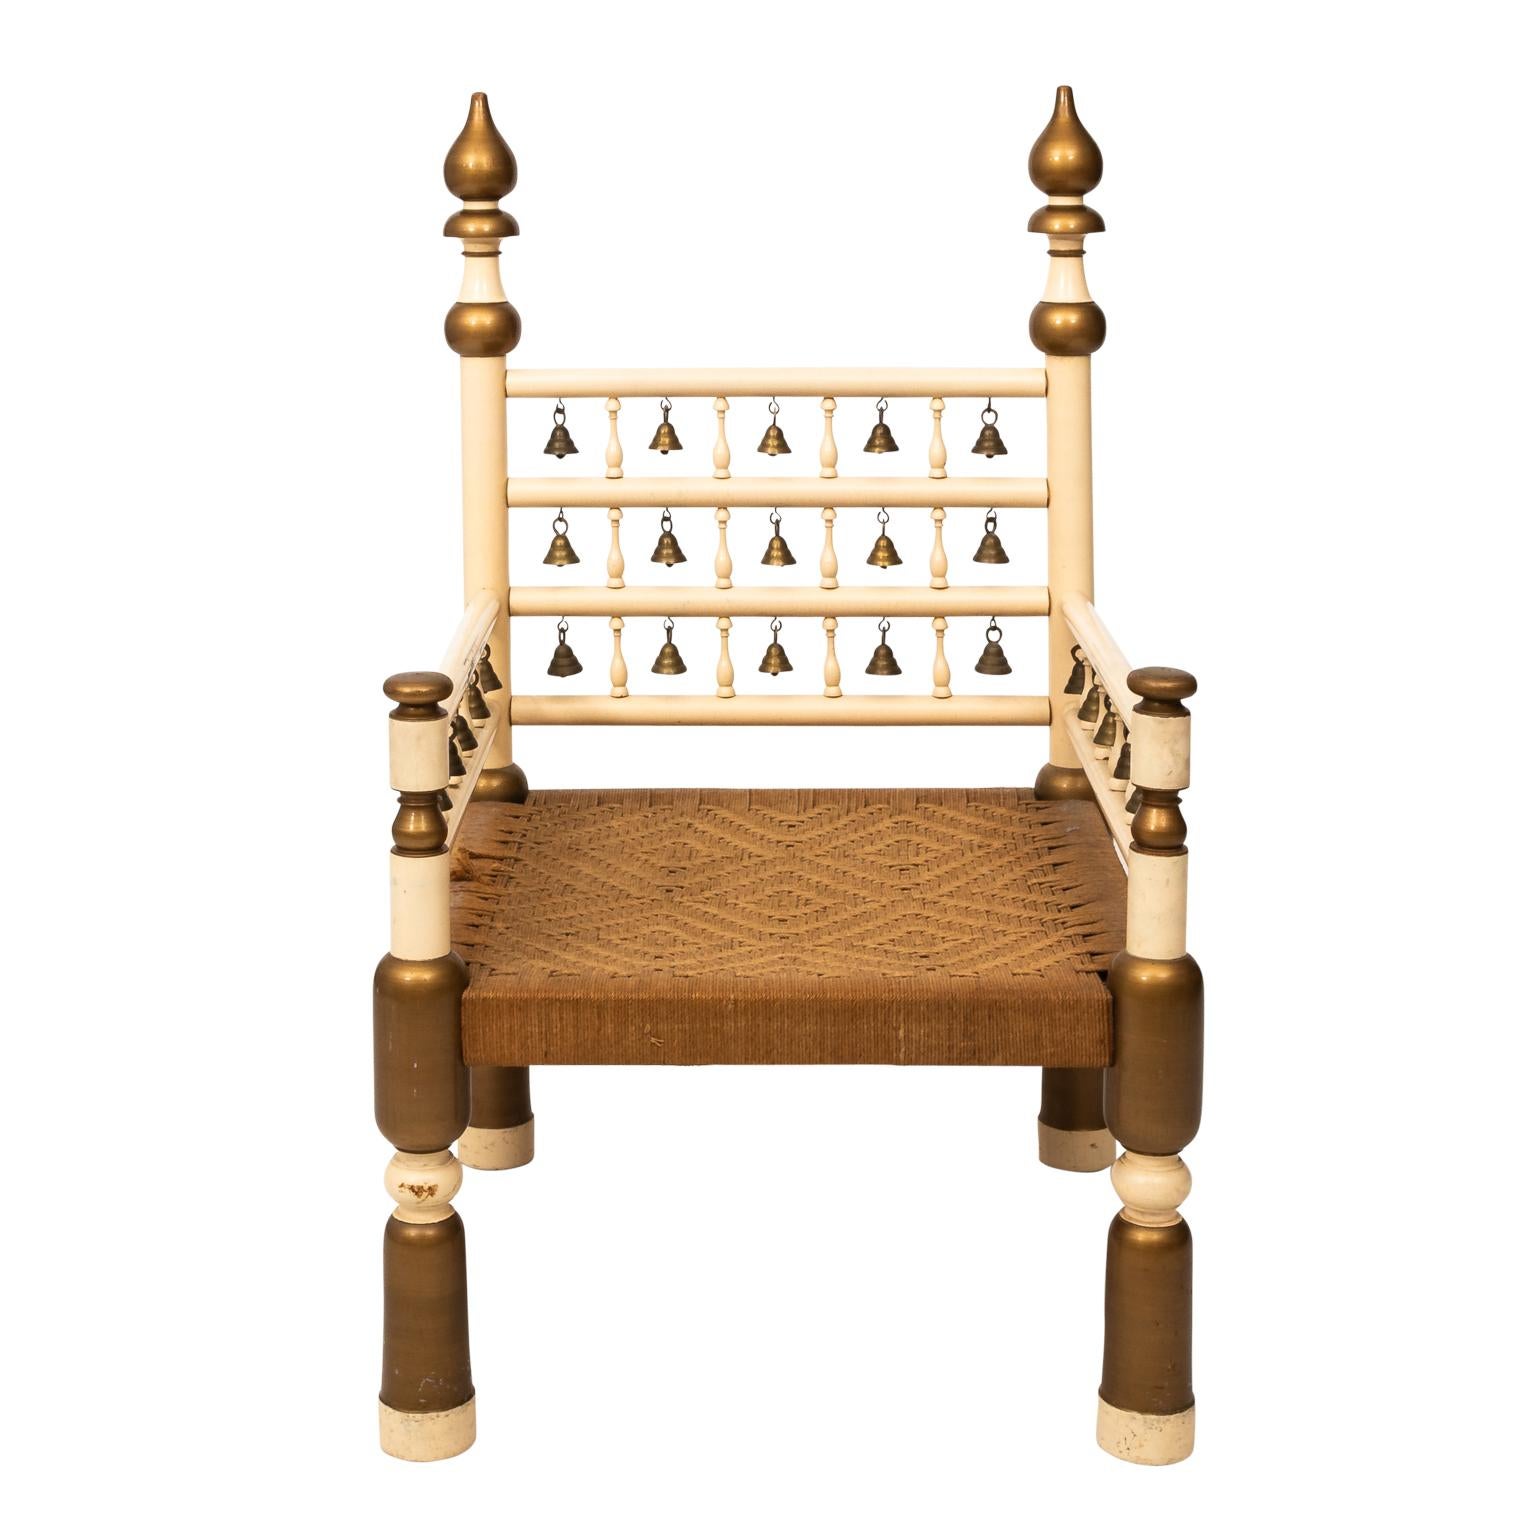 Anlgo-Indian Palace Armchair with Bells